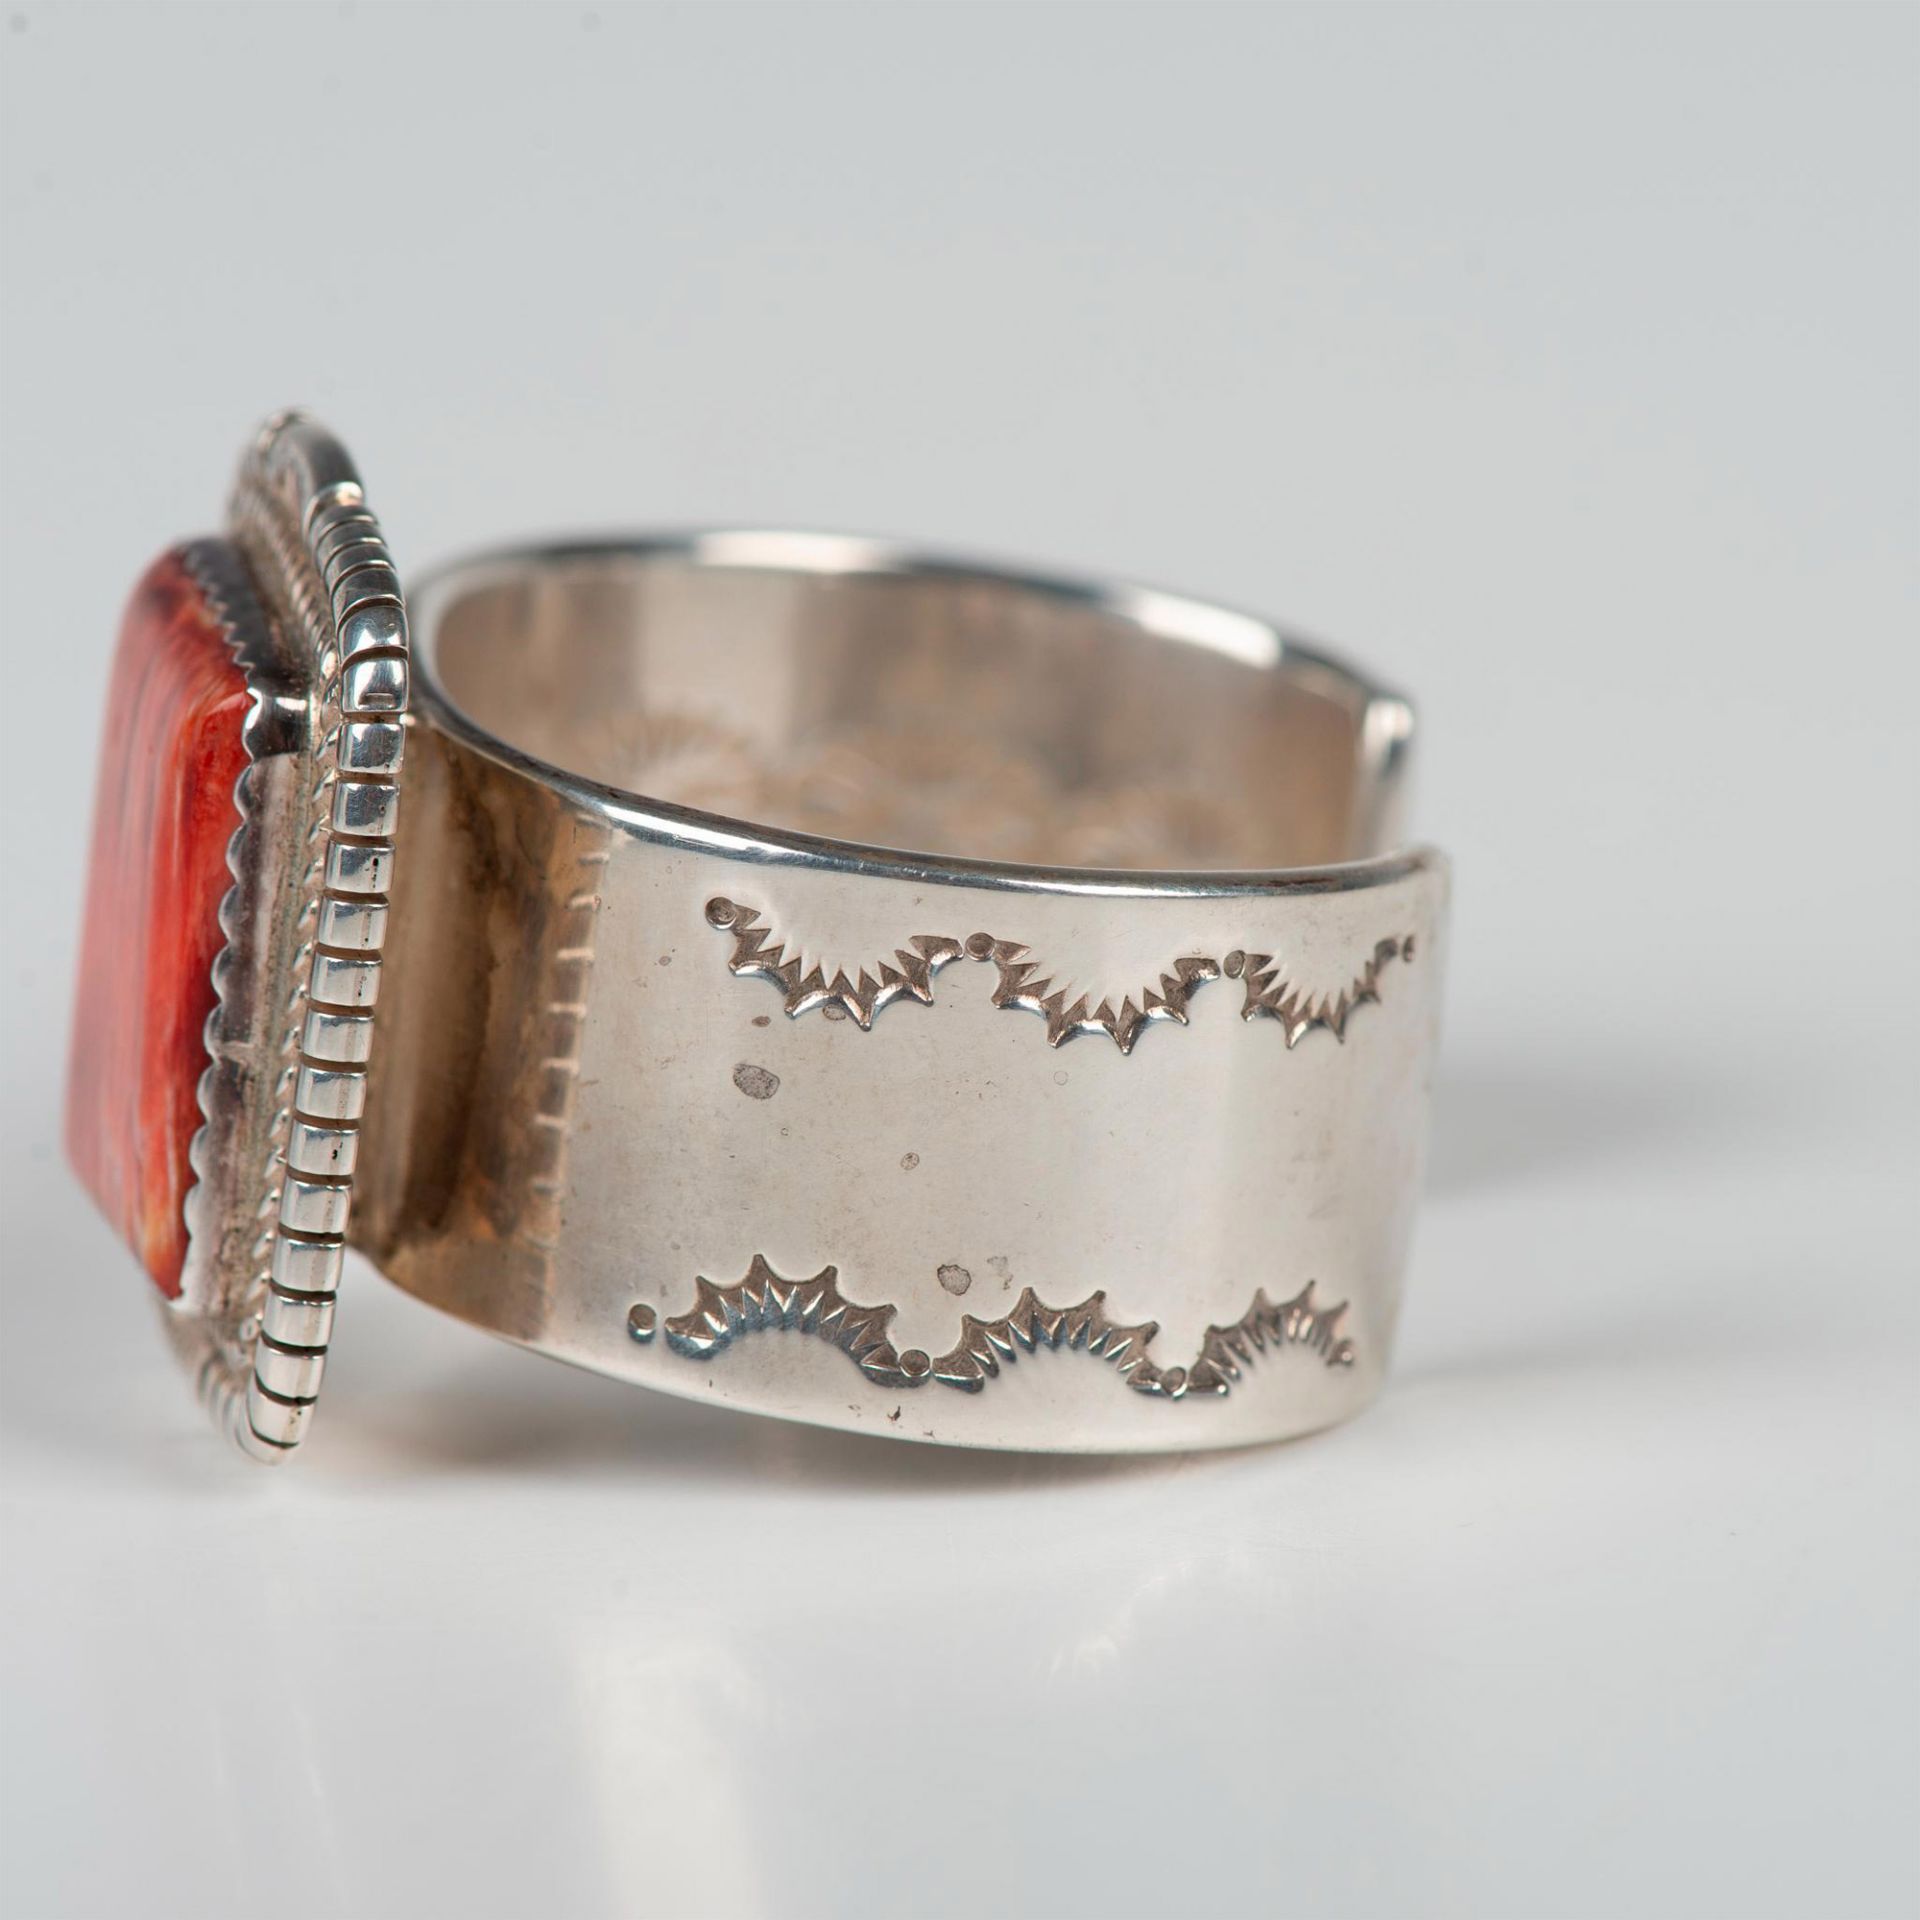 Ca'Win Pueblo Sterling Silver Red Spiny Oyster Cuff Bracelet - Image 3 of 7